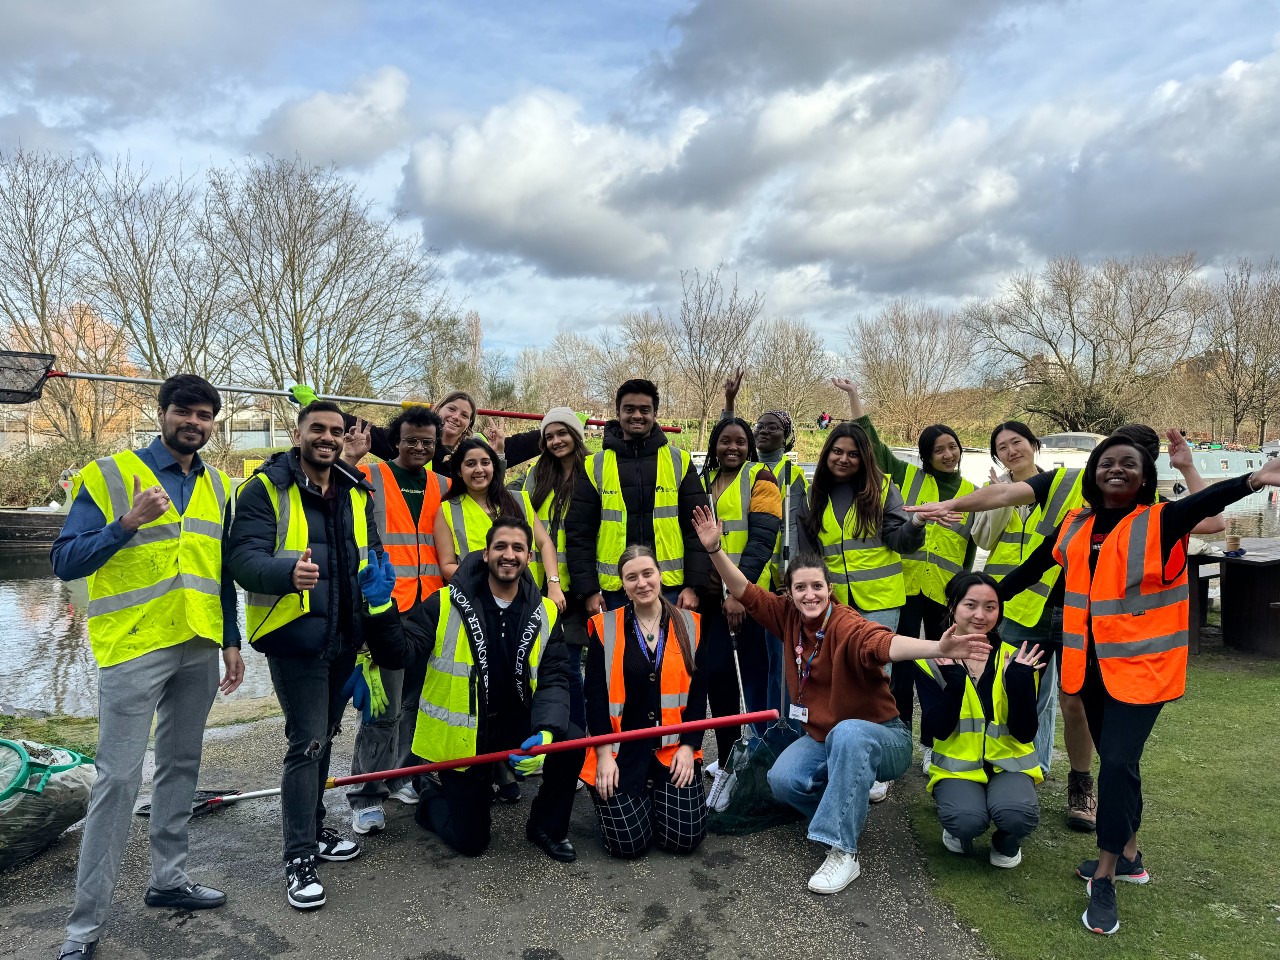 A large group of students with litter pickers and nets posing next to Regent's Canal on the Mile End Campus after cleaning the canal as part of Climate Action Week.